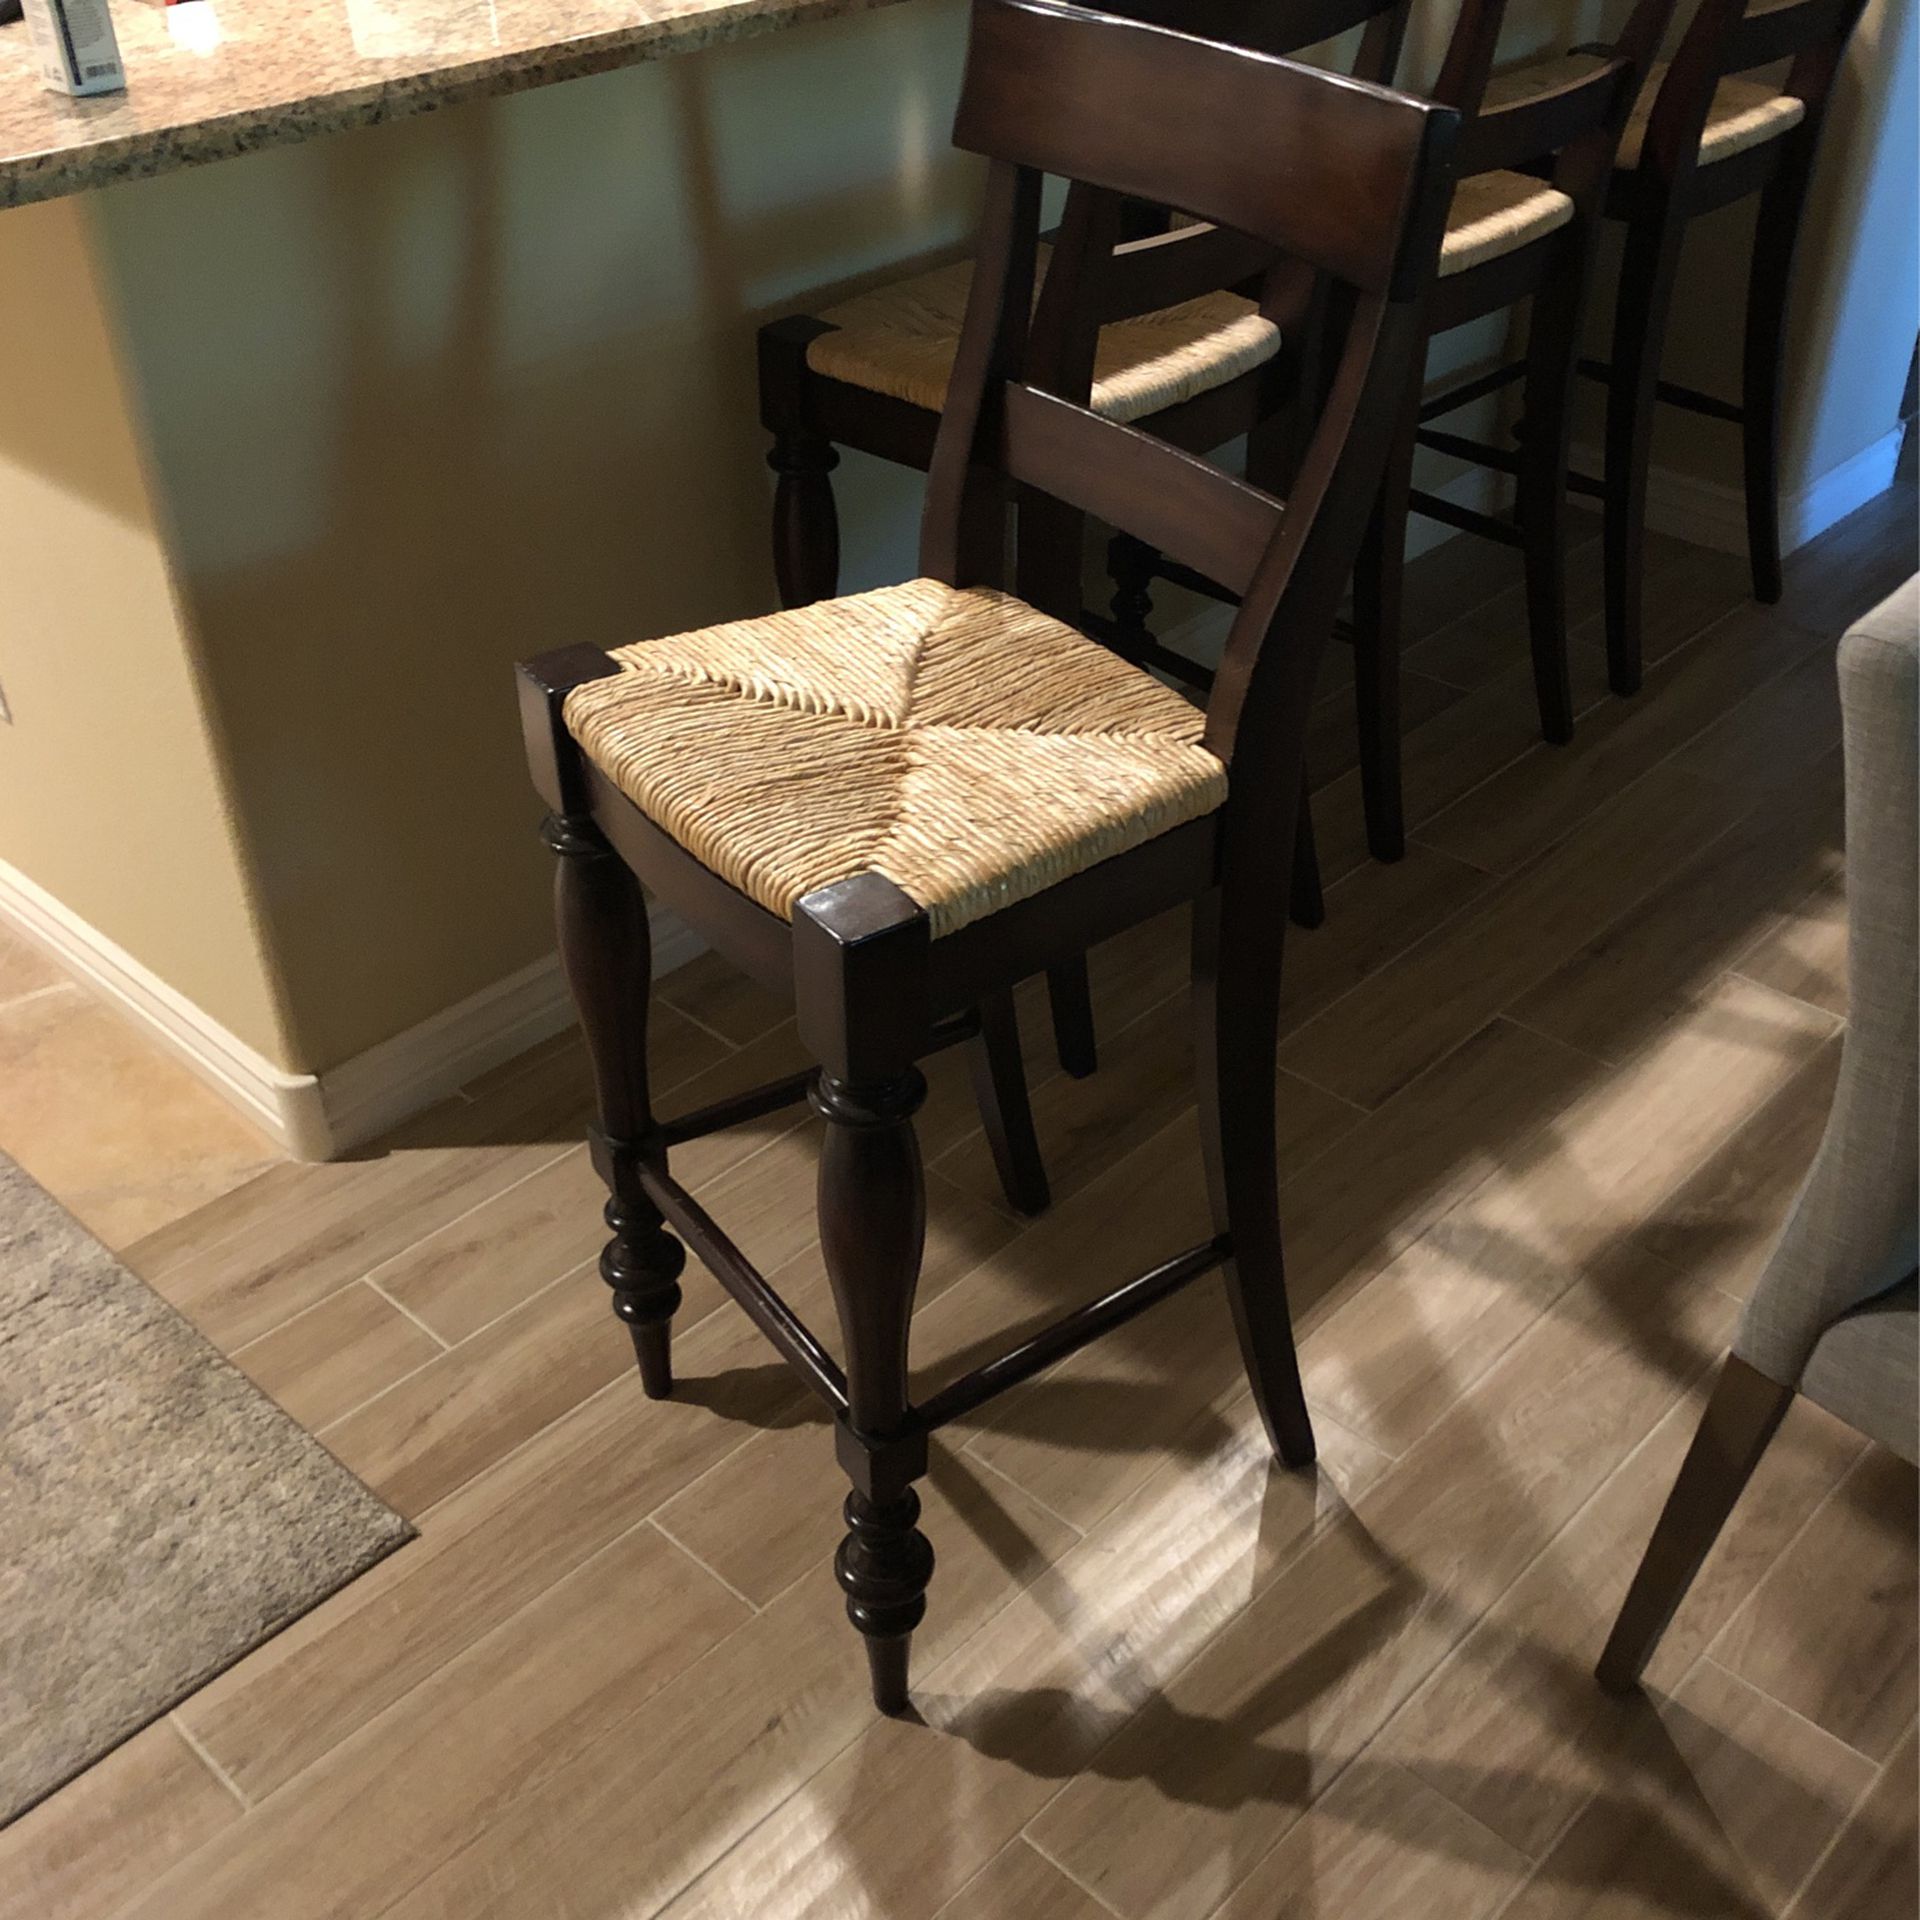 Bar Stools $40 (for all 4 stools)